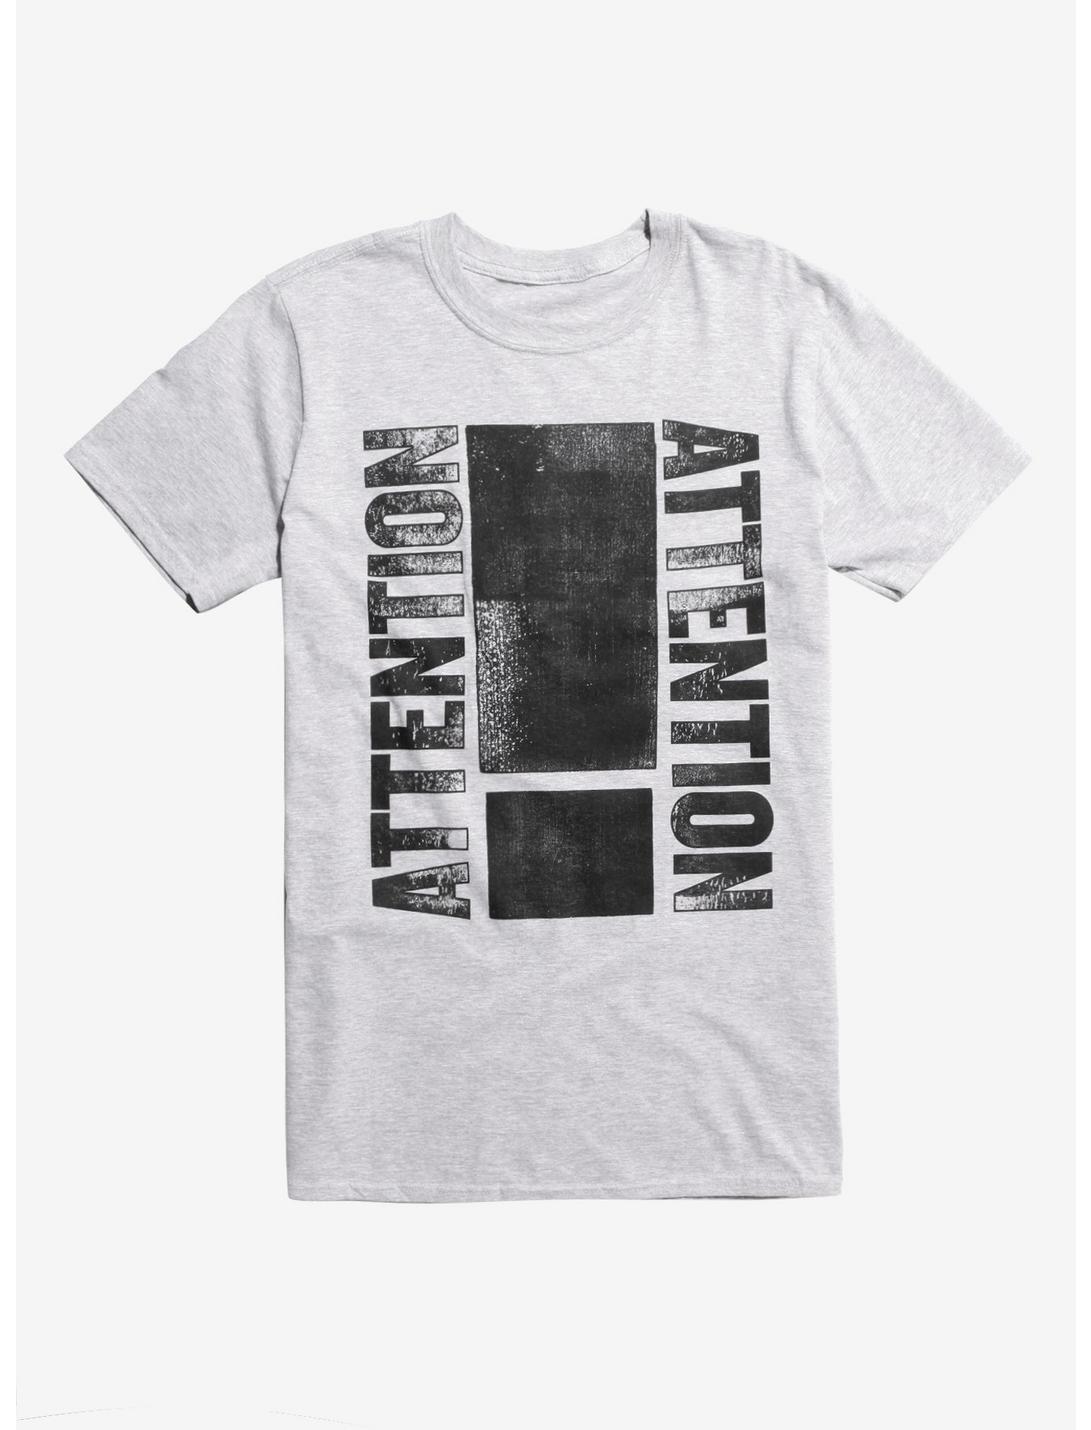 Shinedown Attention Attention T-Shirt, GREY, hi-res